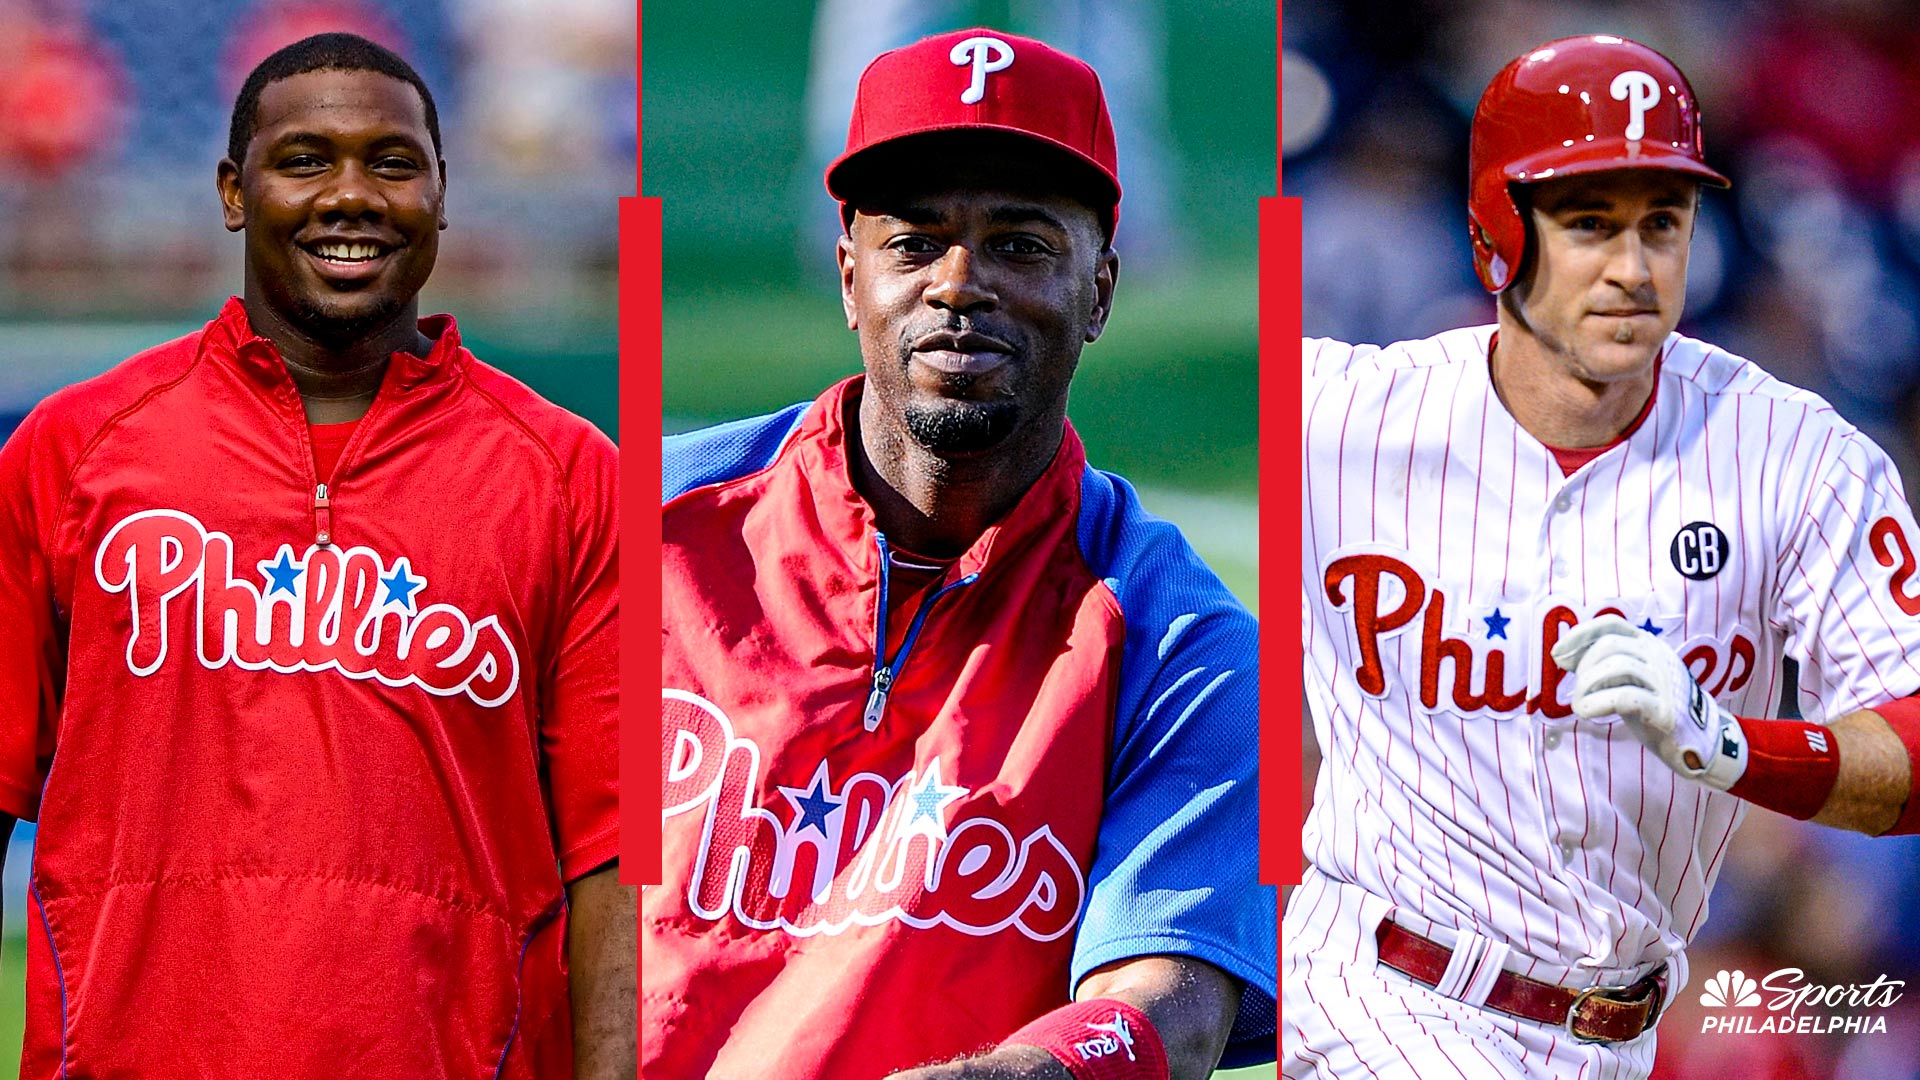 My favorite player: Jimmy Rollins - The Athletic